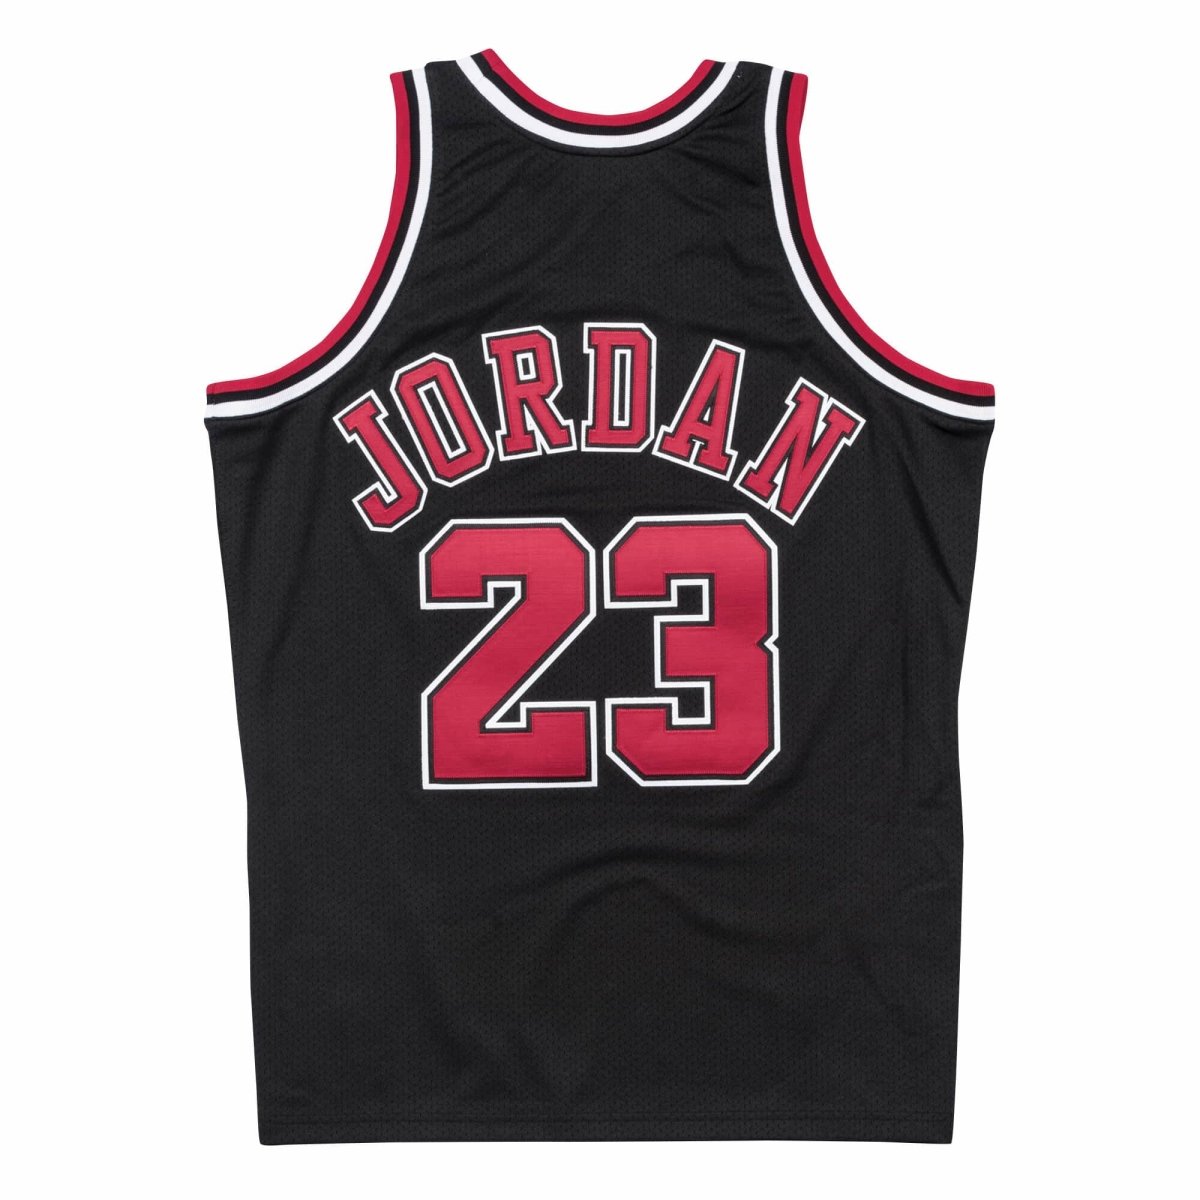 AUTHENTIC ALL-STAR EAST 1996 MICHAEL JORDAN JERSEY AJY4GS18066